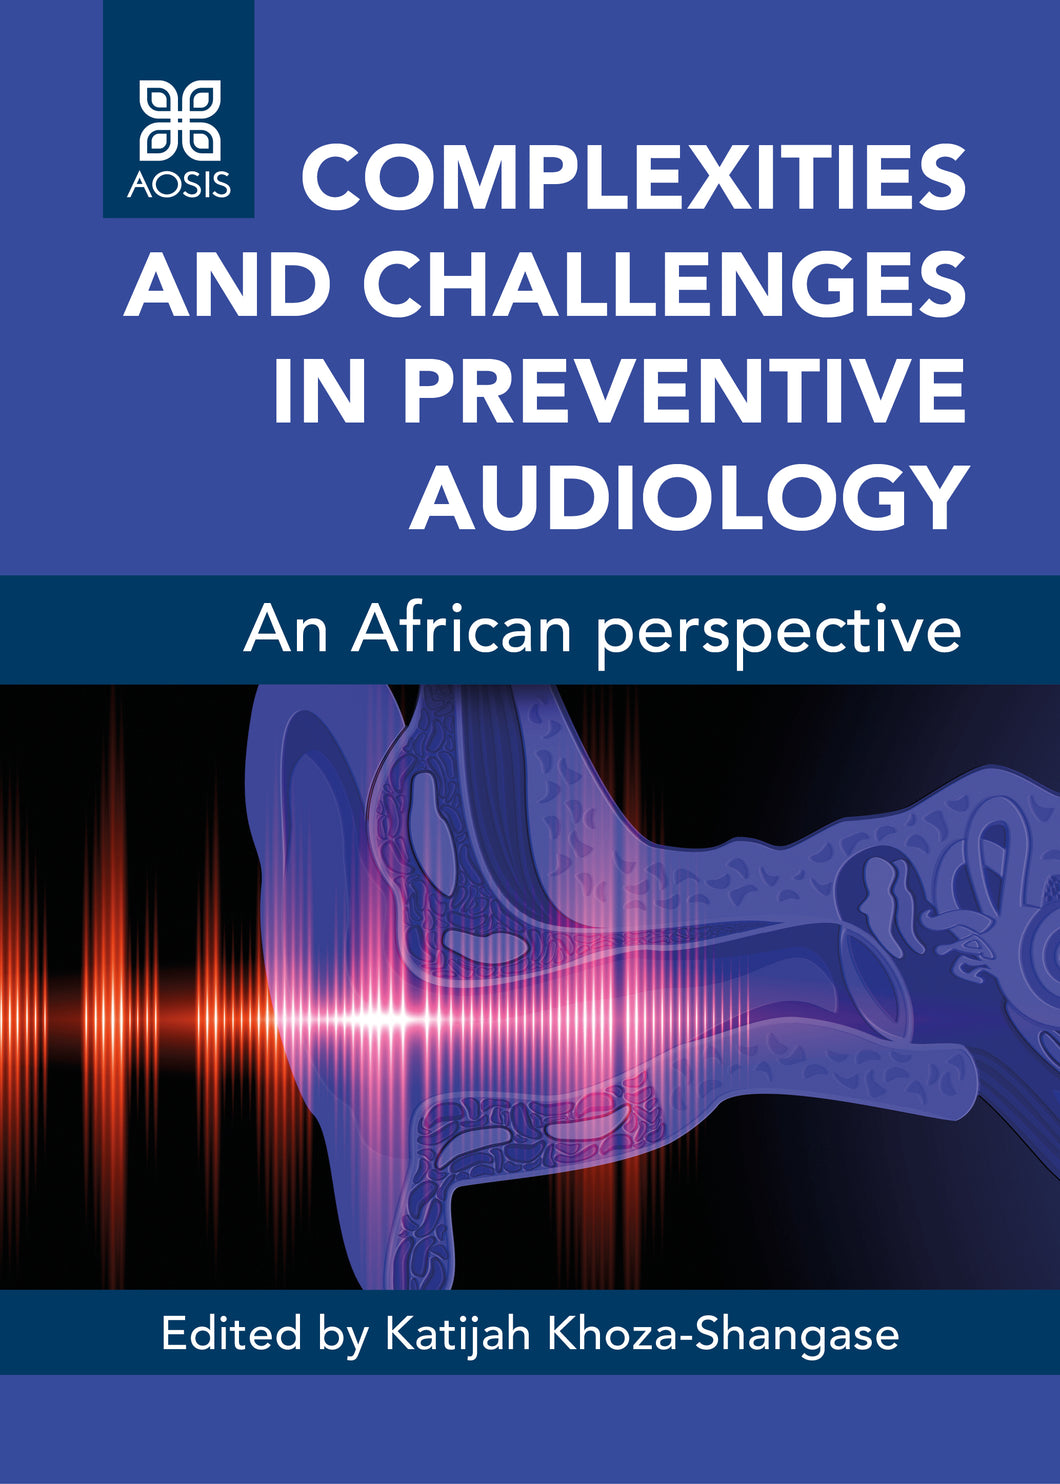 Complexities and challenges in preventive audiology: An African perspective